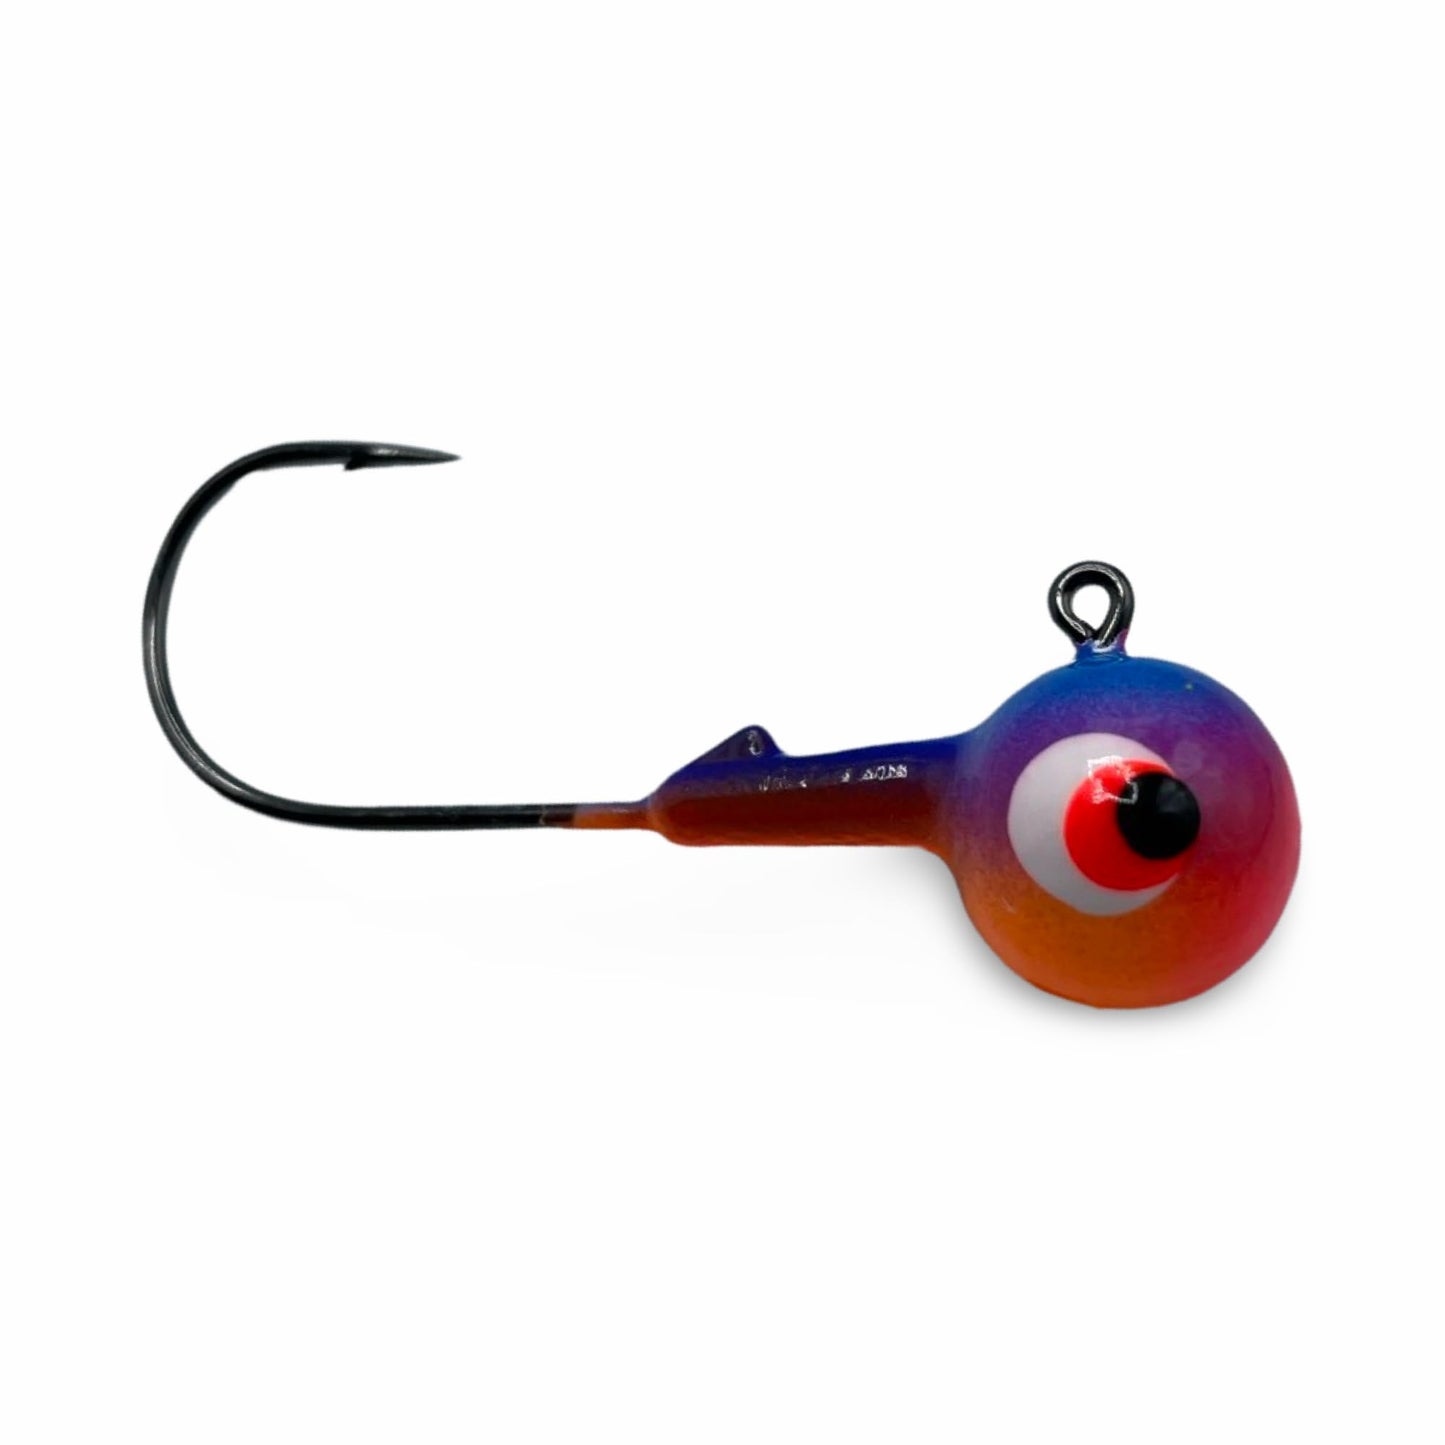 Pro Guide Jig Heads - 3/8oz (Pack of 50) (Blueberry Blonde)